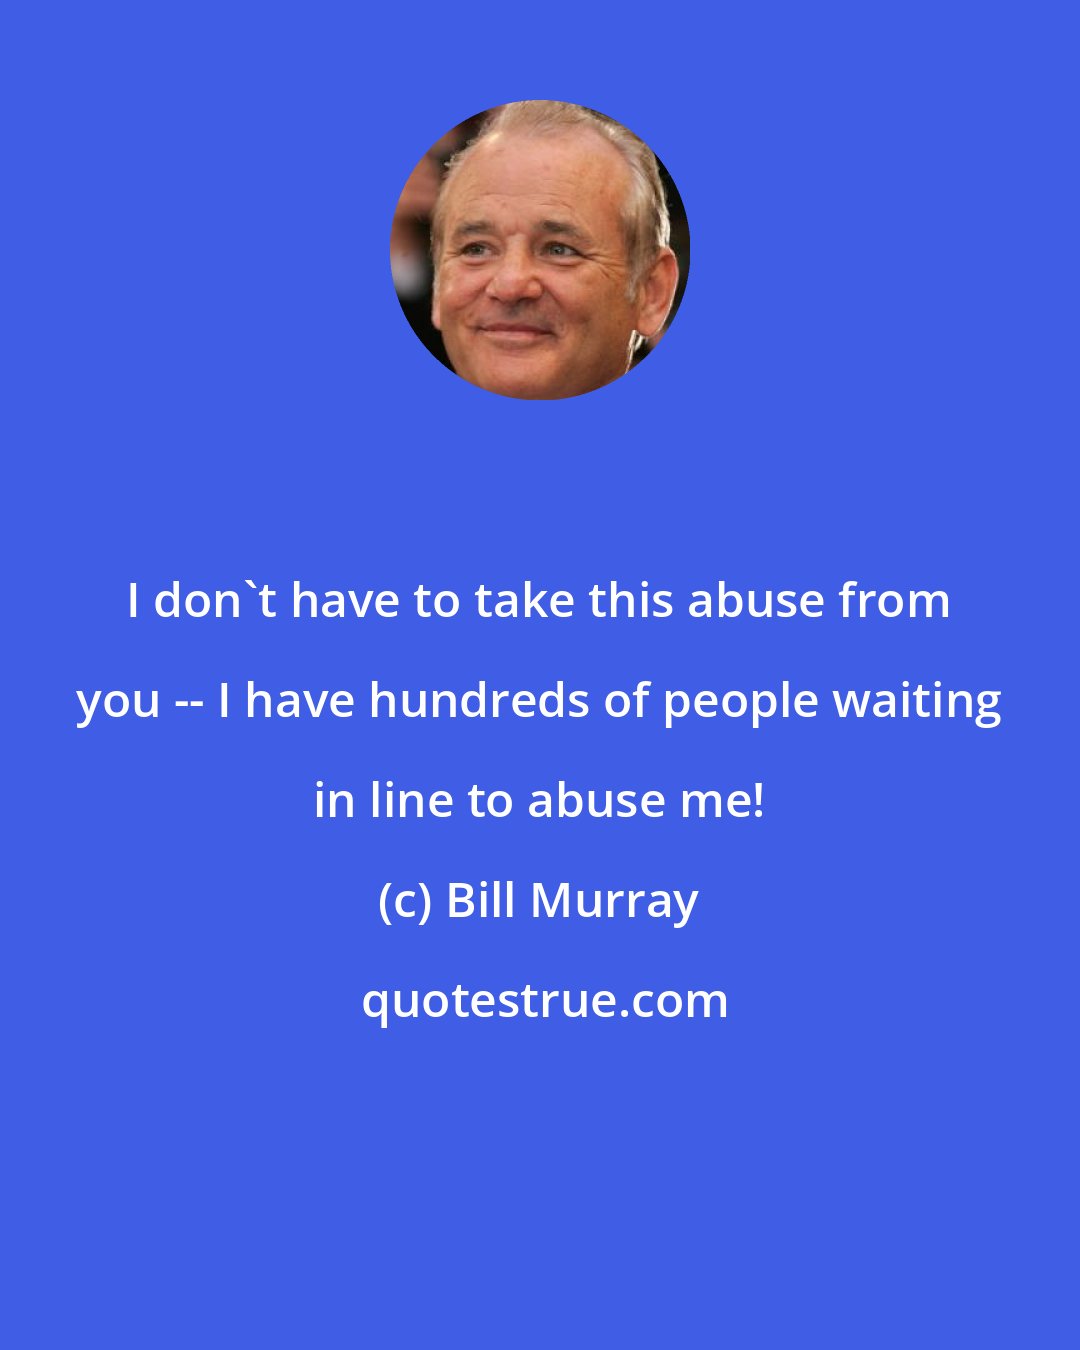 Bill Murray: I don't have to take this abuse from you -- I have hundreds of people waiting in line to abuse me!